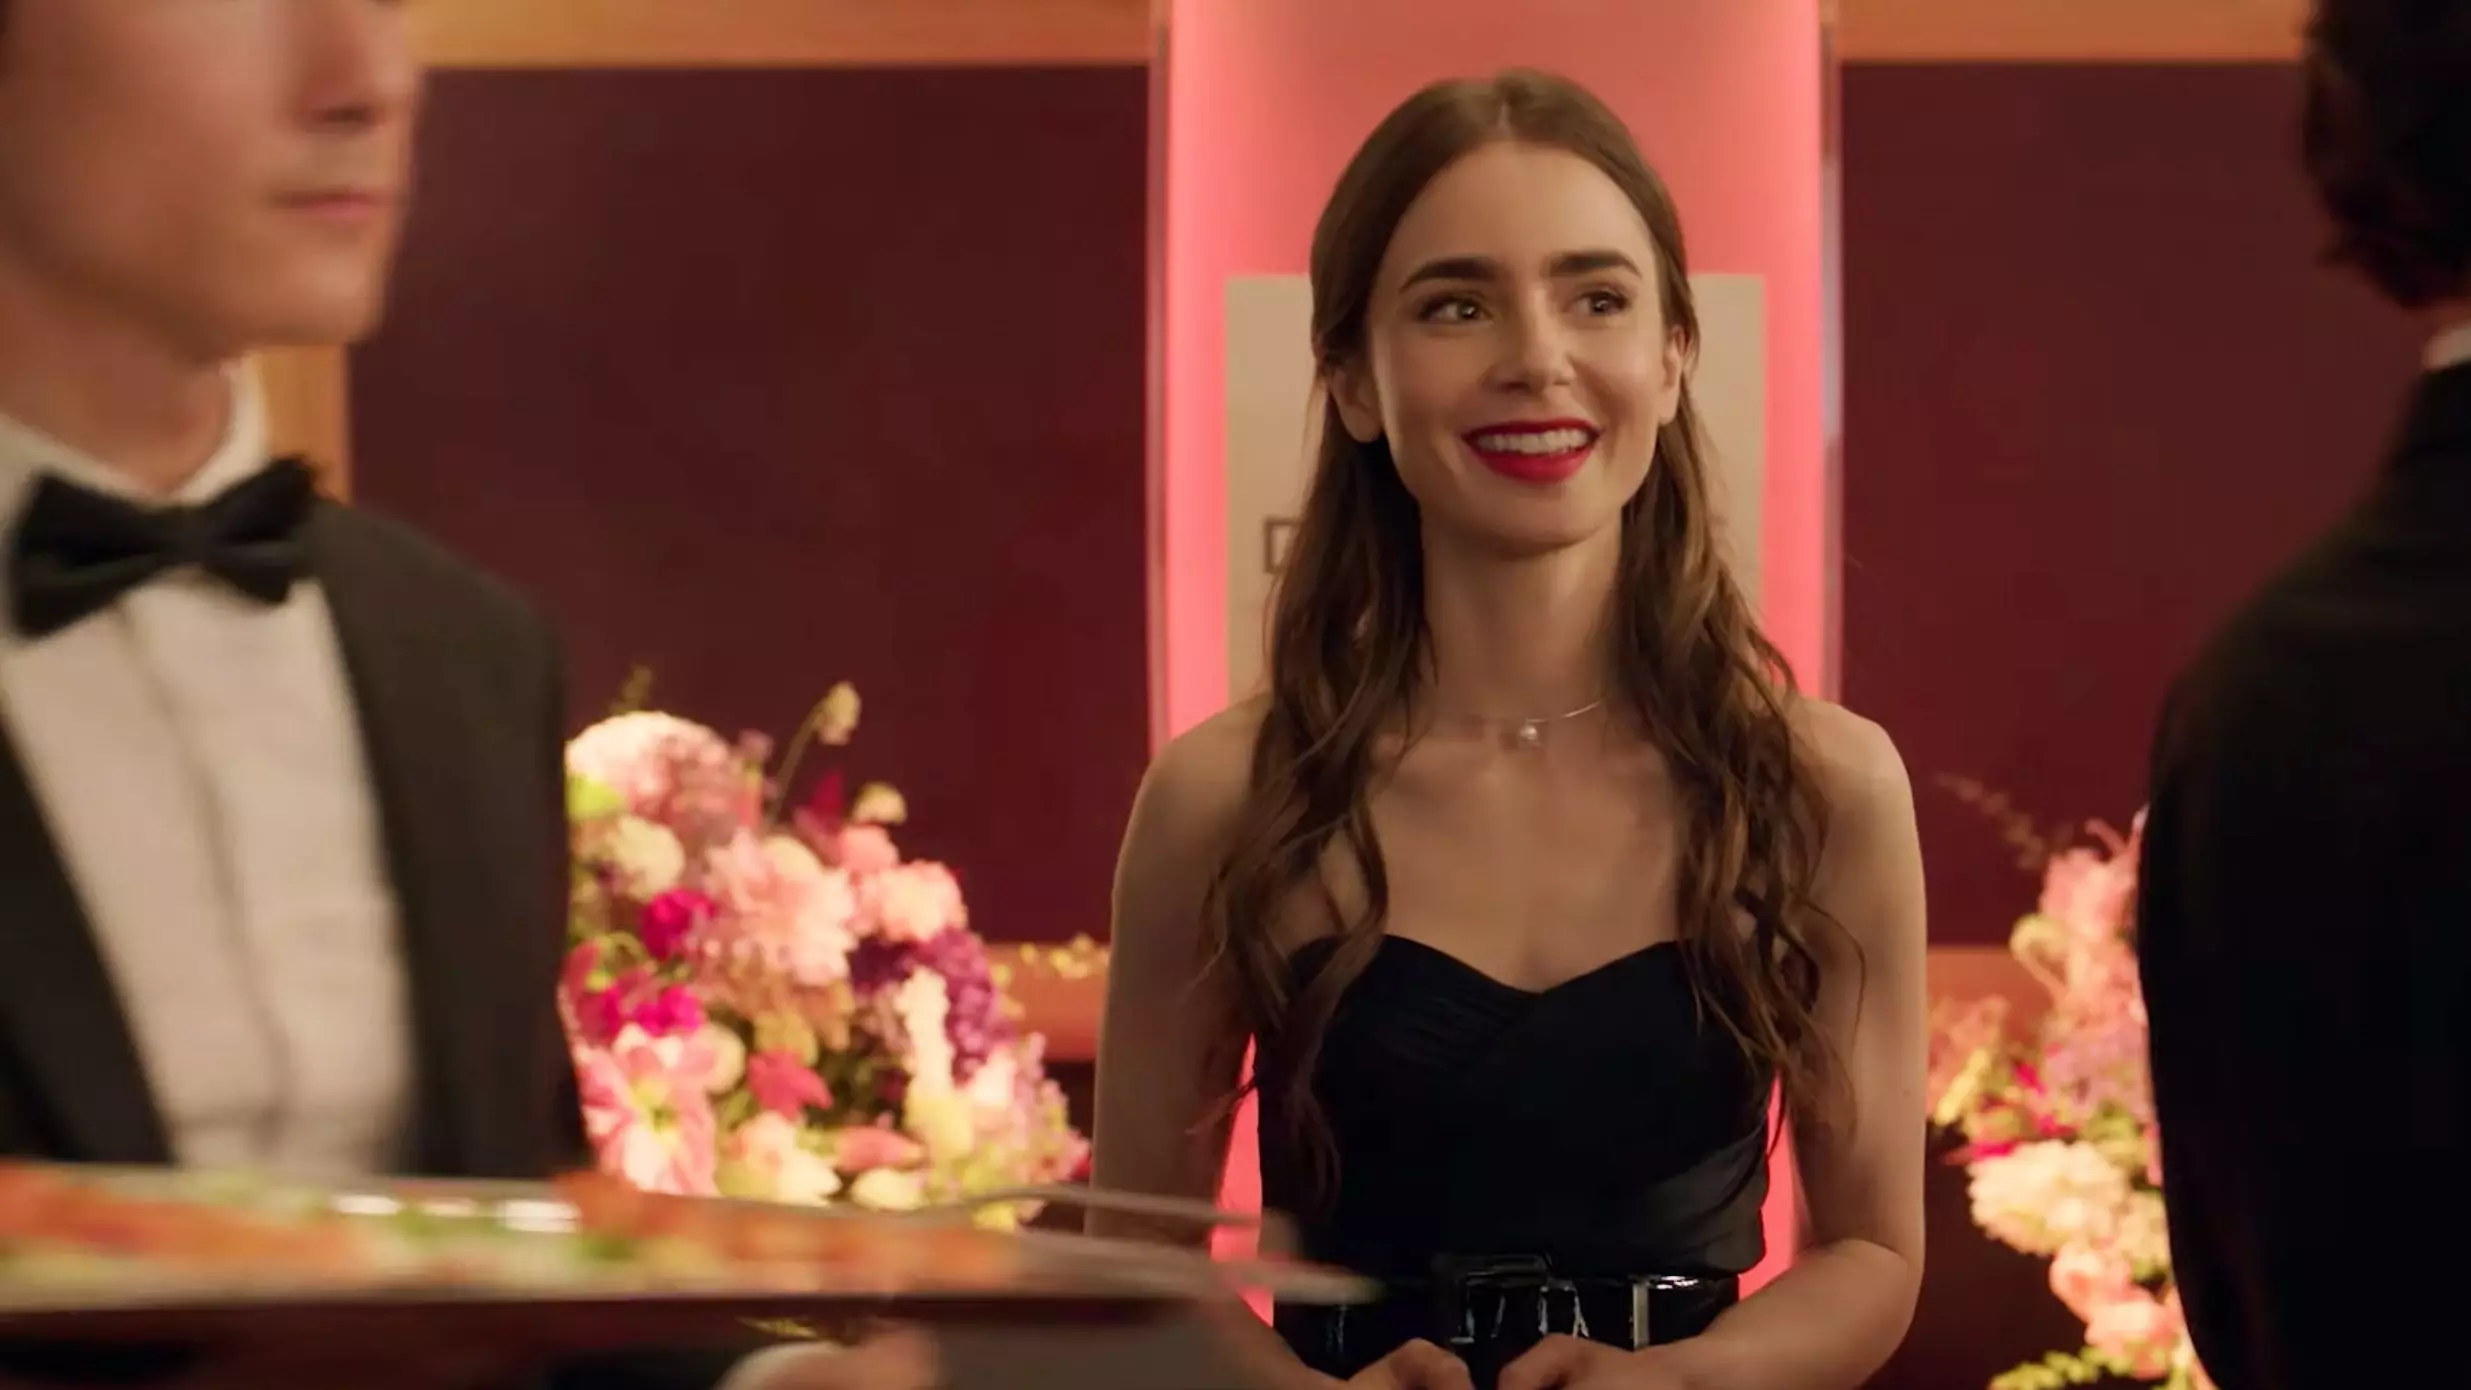 First Trailer Drops For Lily Collins' New Netflix Series 'Emily in Paris'